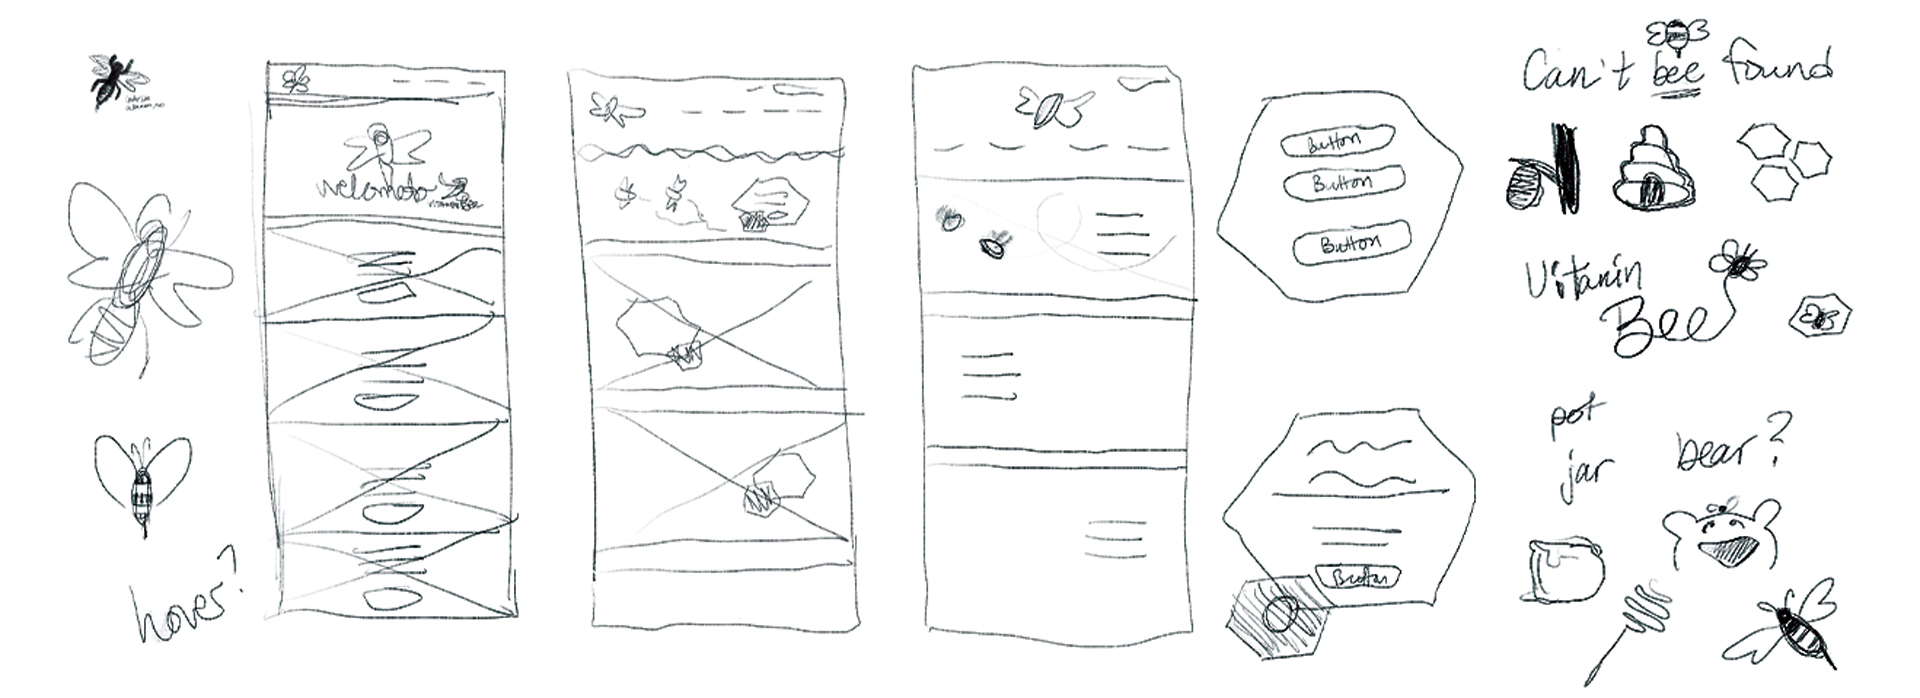 Vitamin Bee sketches, some wireframes and icons.